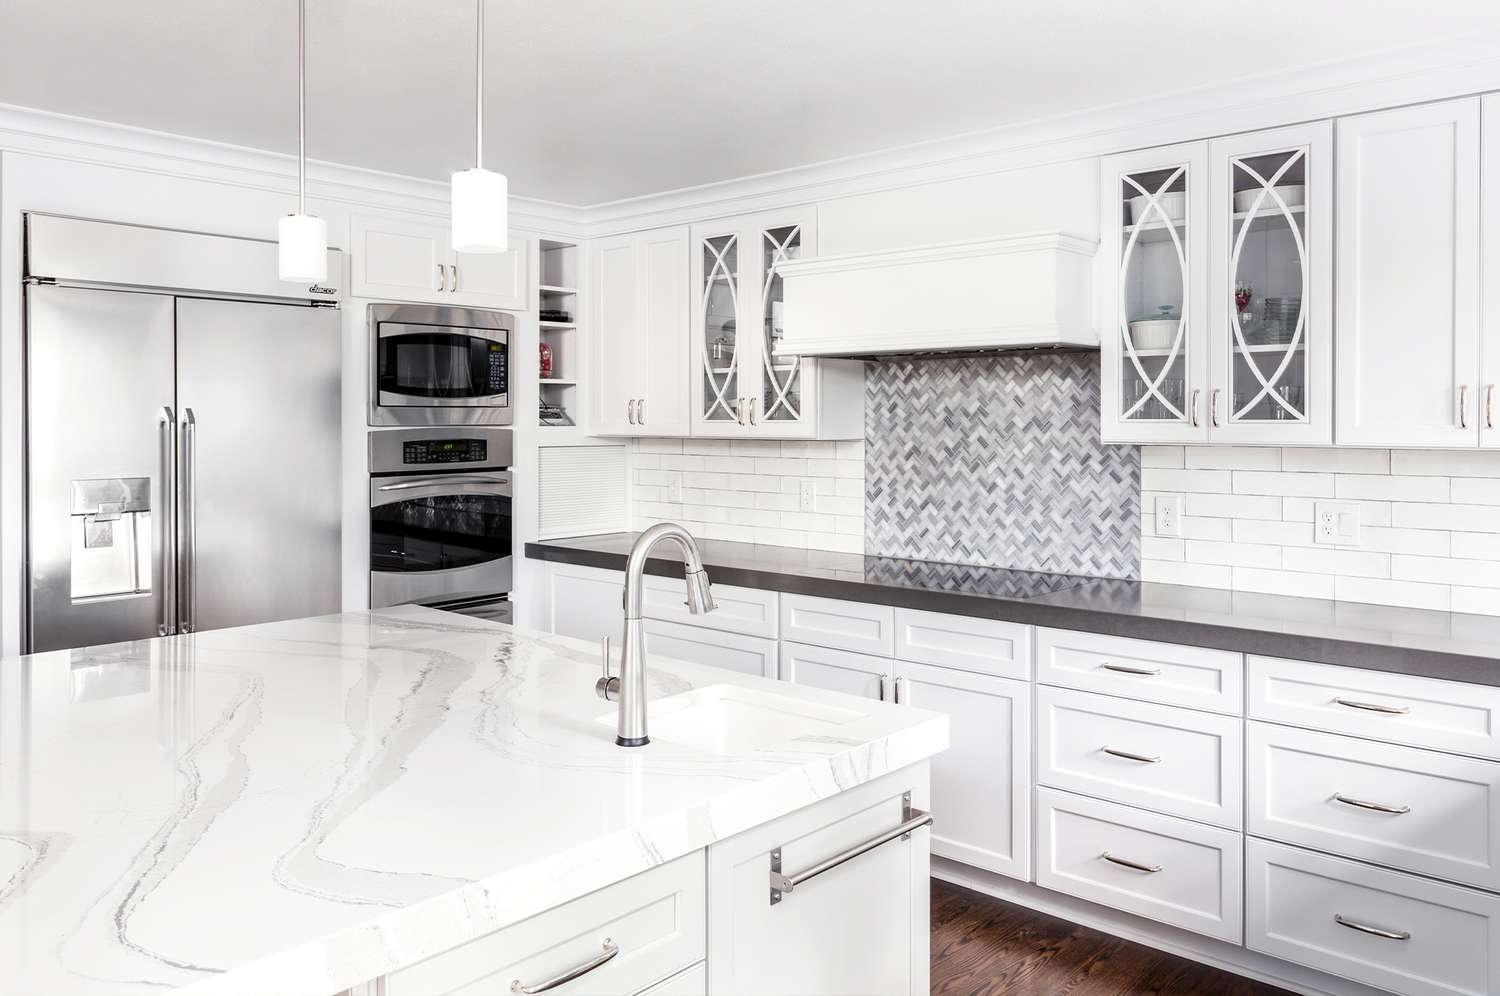 Revamping Your Kitchen - From Outdated to Outstanding